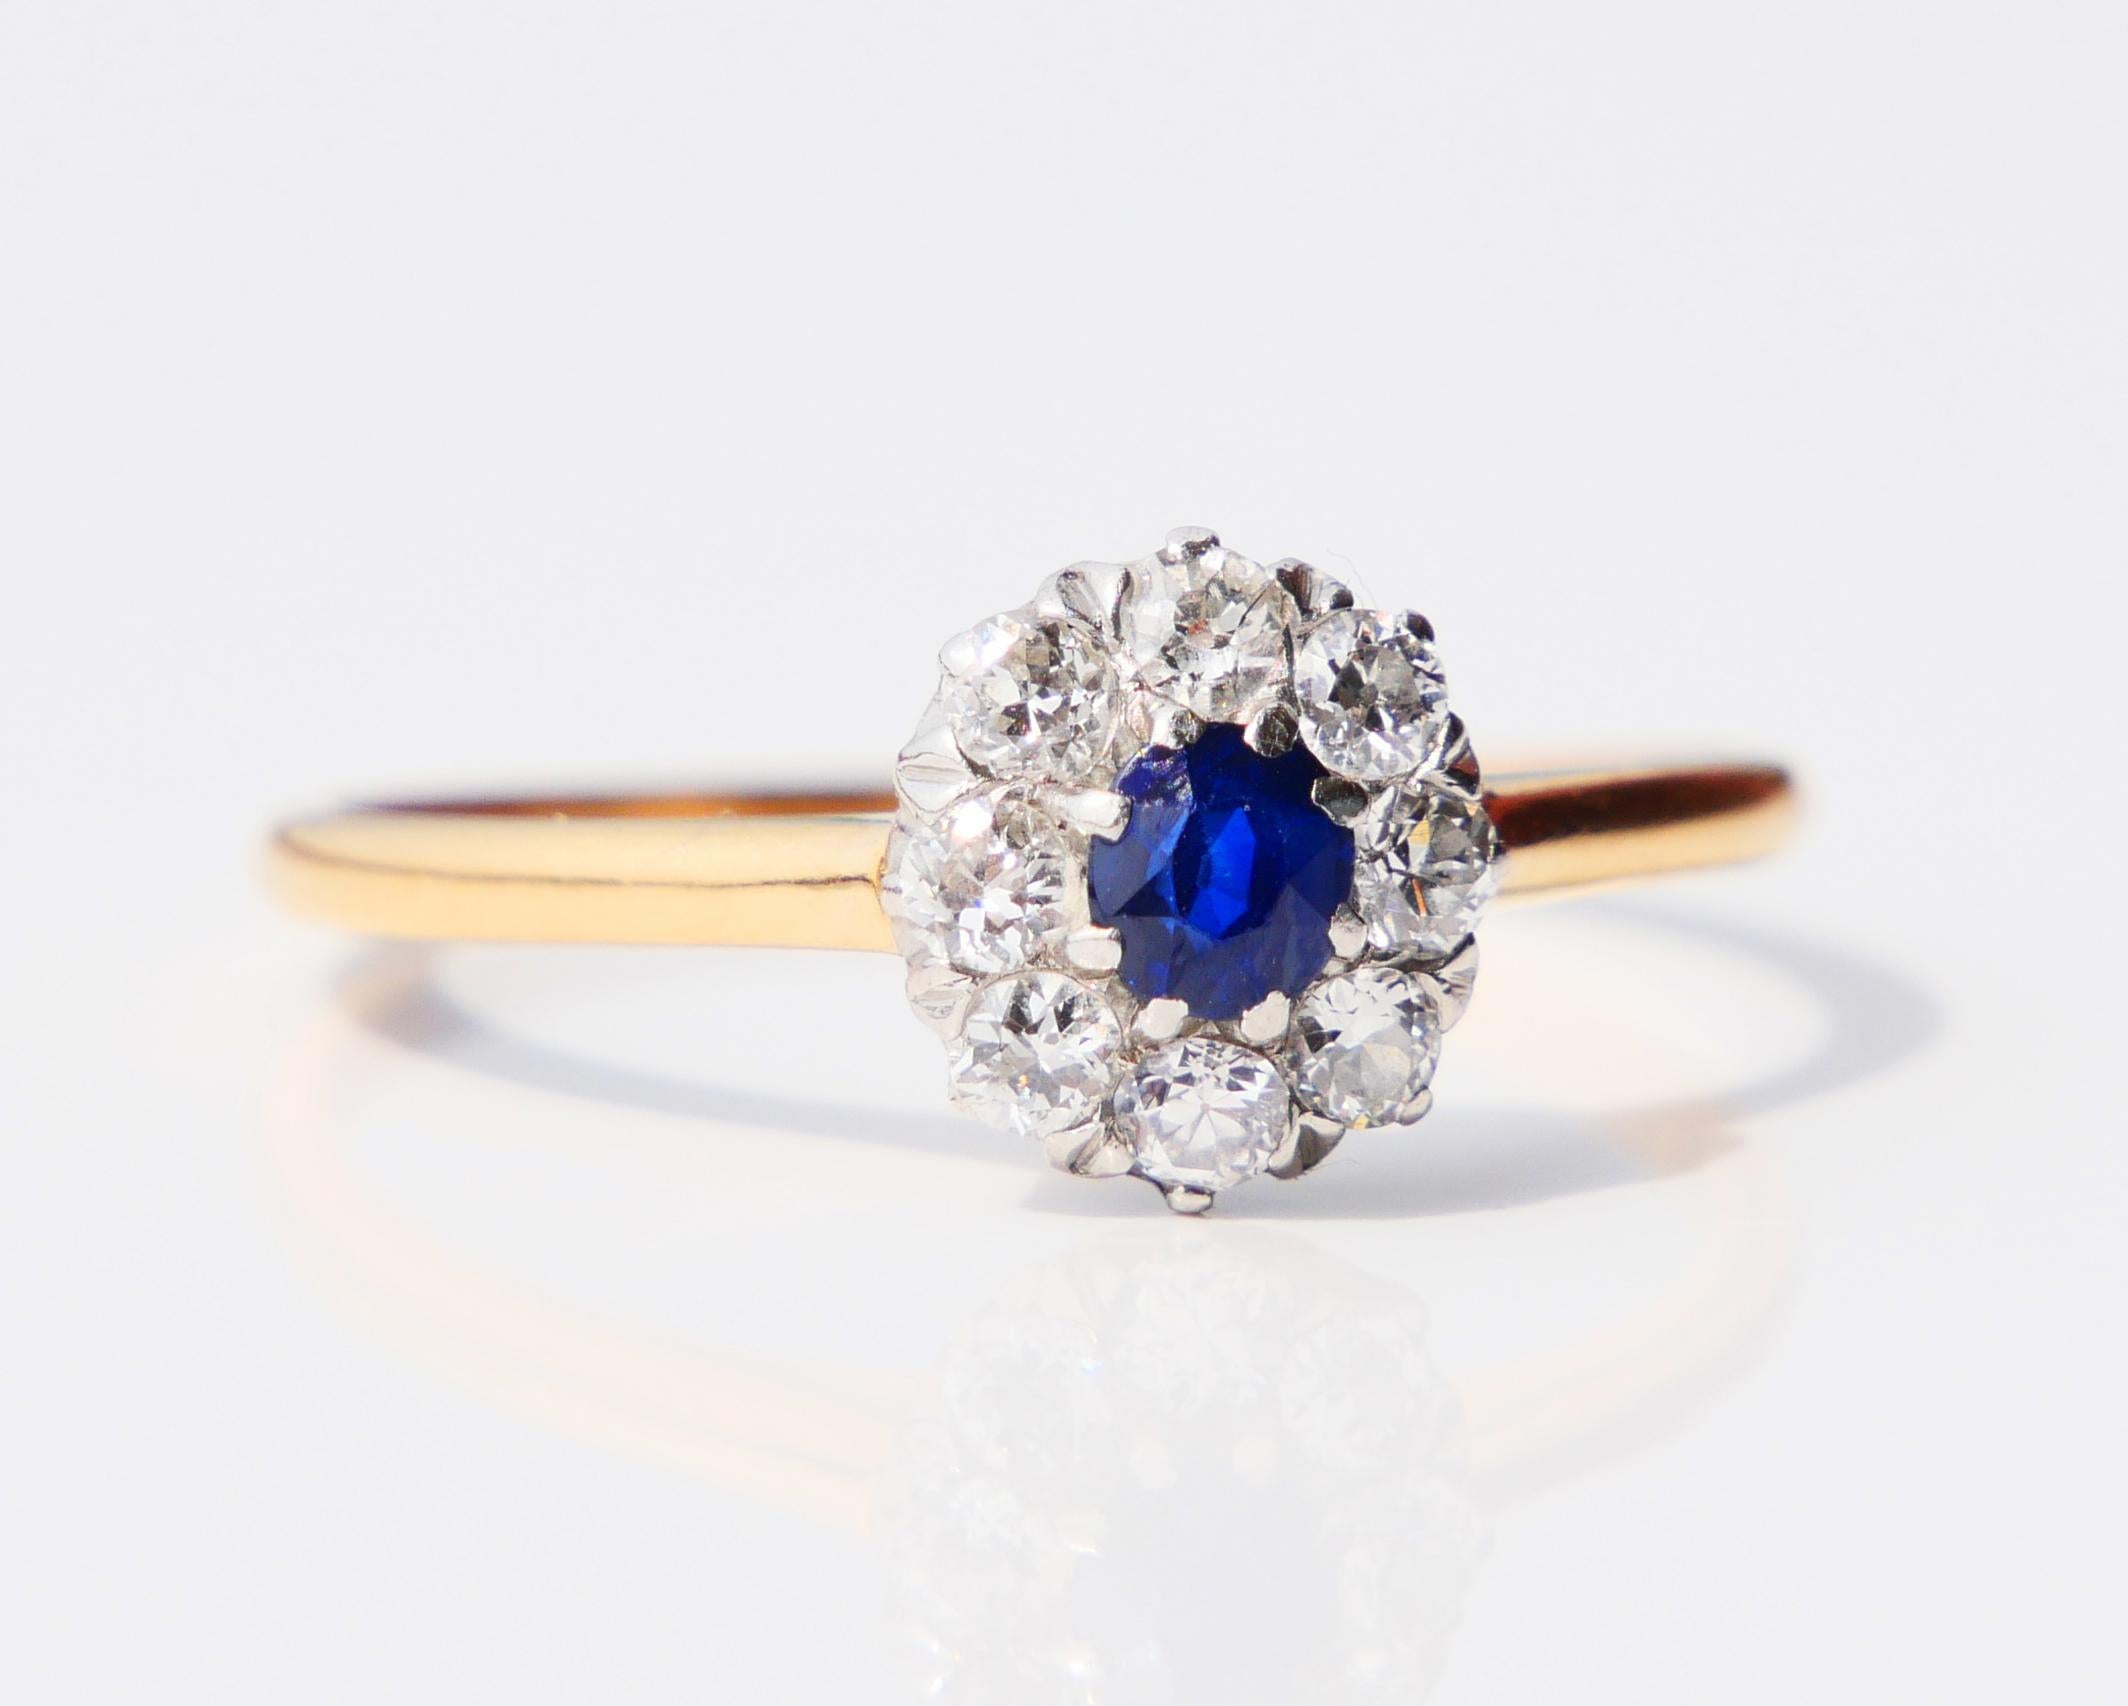 1916 Nordic Halo Ring 0.25 ct Sapphire Diamonds solid 18K Gold Ø 8.25 US /2.5gr 1